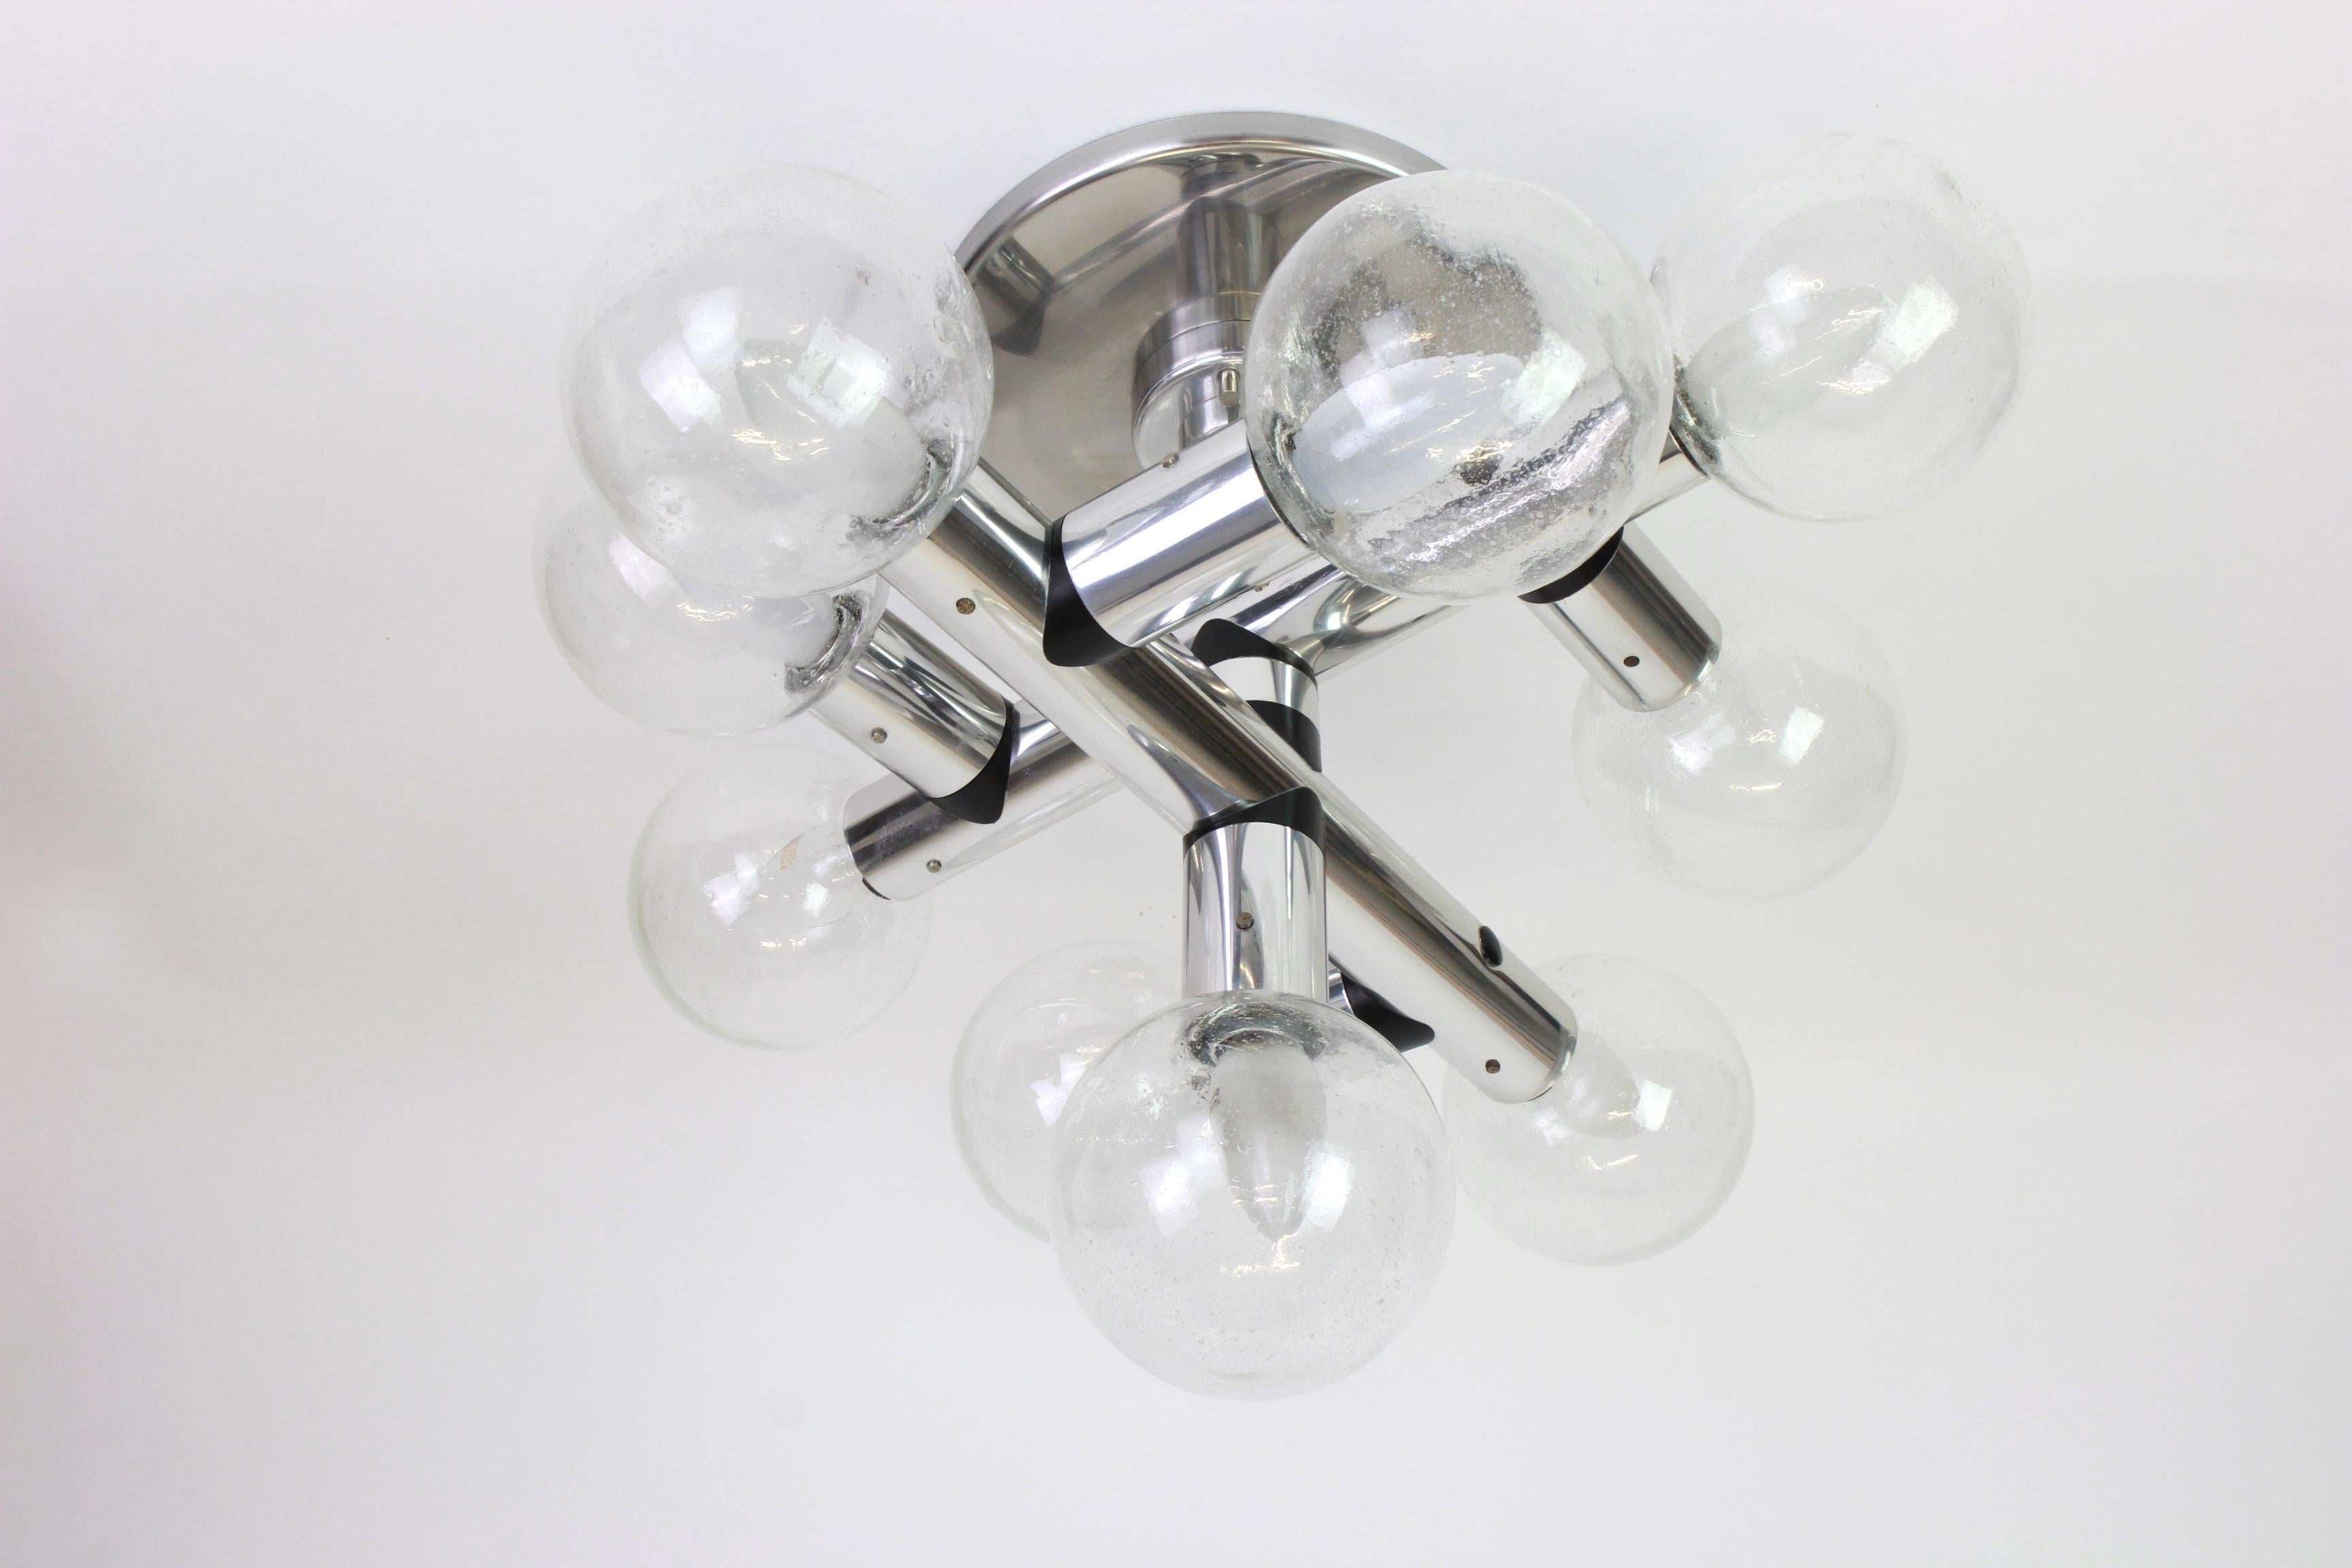 Exclusive sputnik light fixture designed by Kalmar during the 1970s with nine bubble glass ball on an Alu frame.

Heavy quality and in very good condition. Cleaned, well-wired and ready to use.

 The fixture requires nine E14 small bulbs with 40W